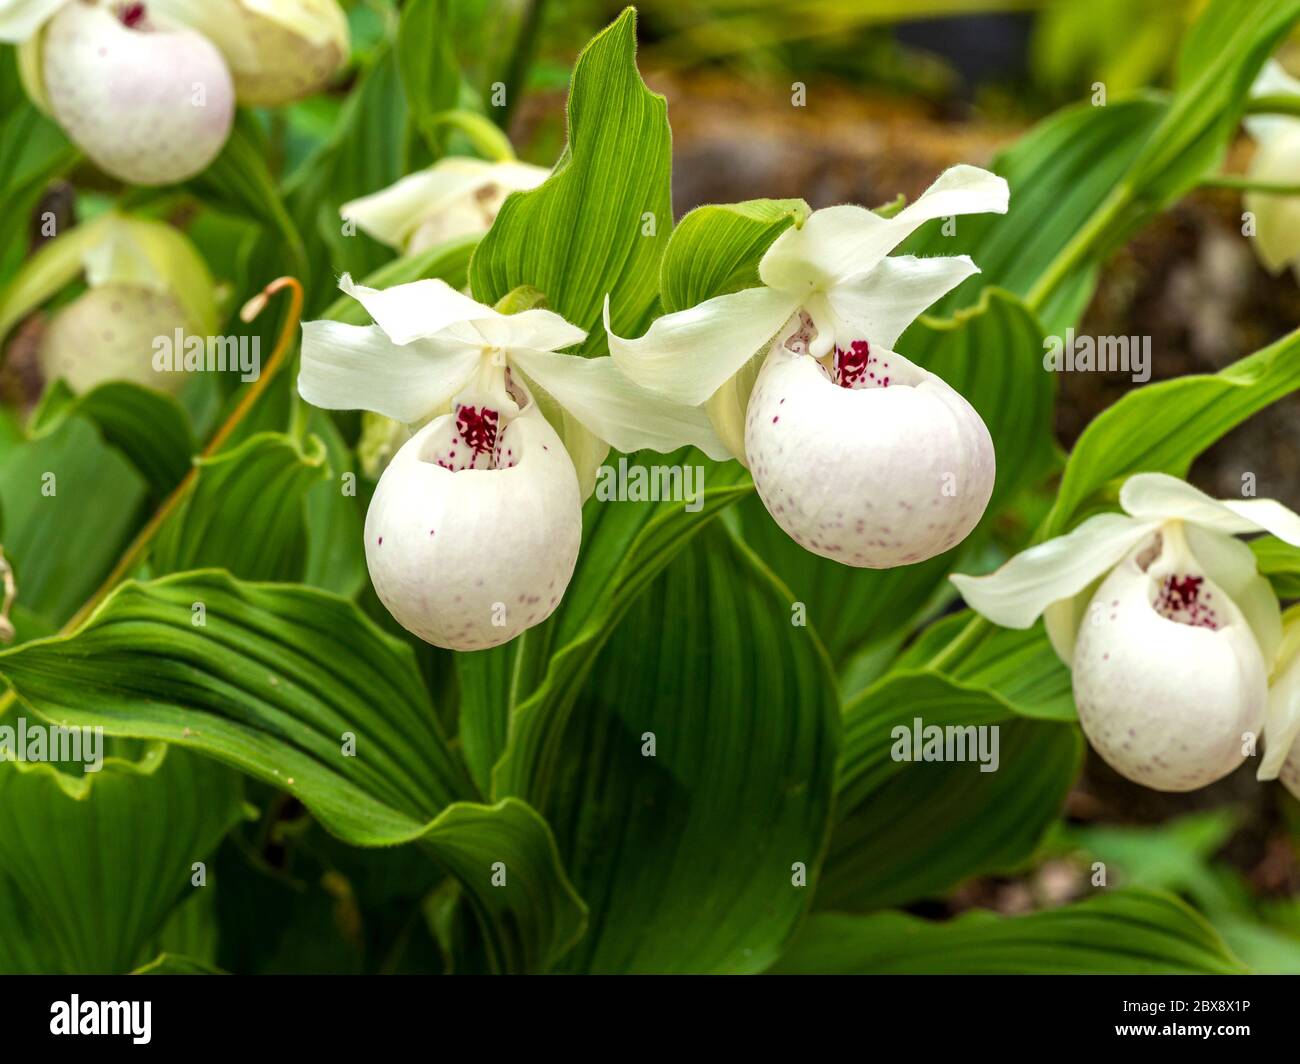 White and purple flowers and green leaves of the lady's slipper orchid, Cypripedium reginae Stock Photo